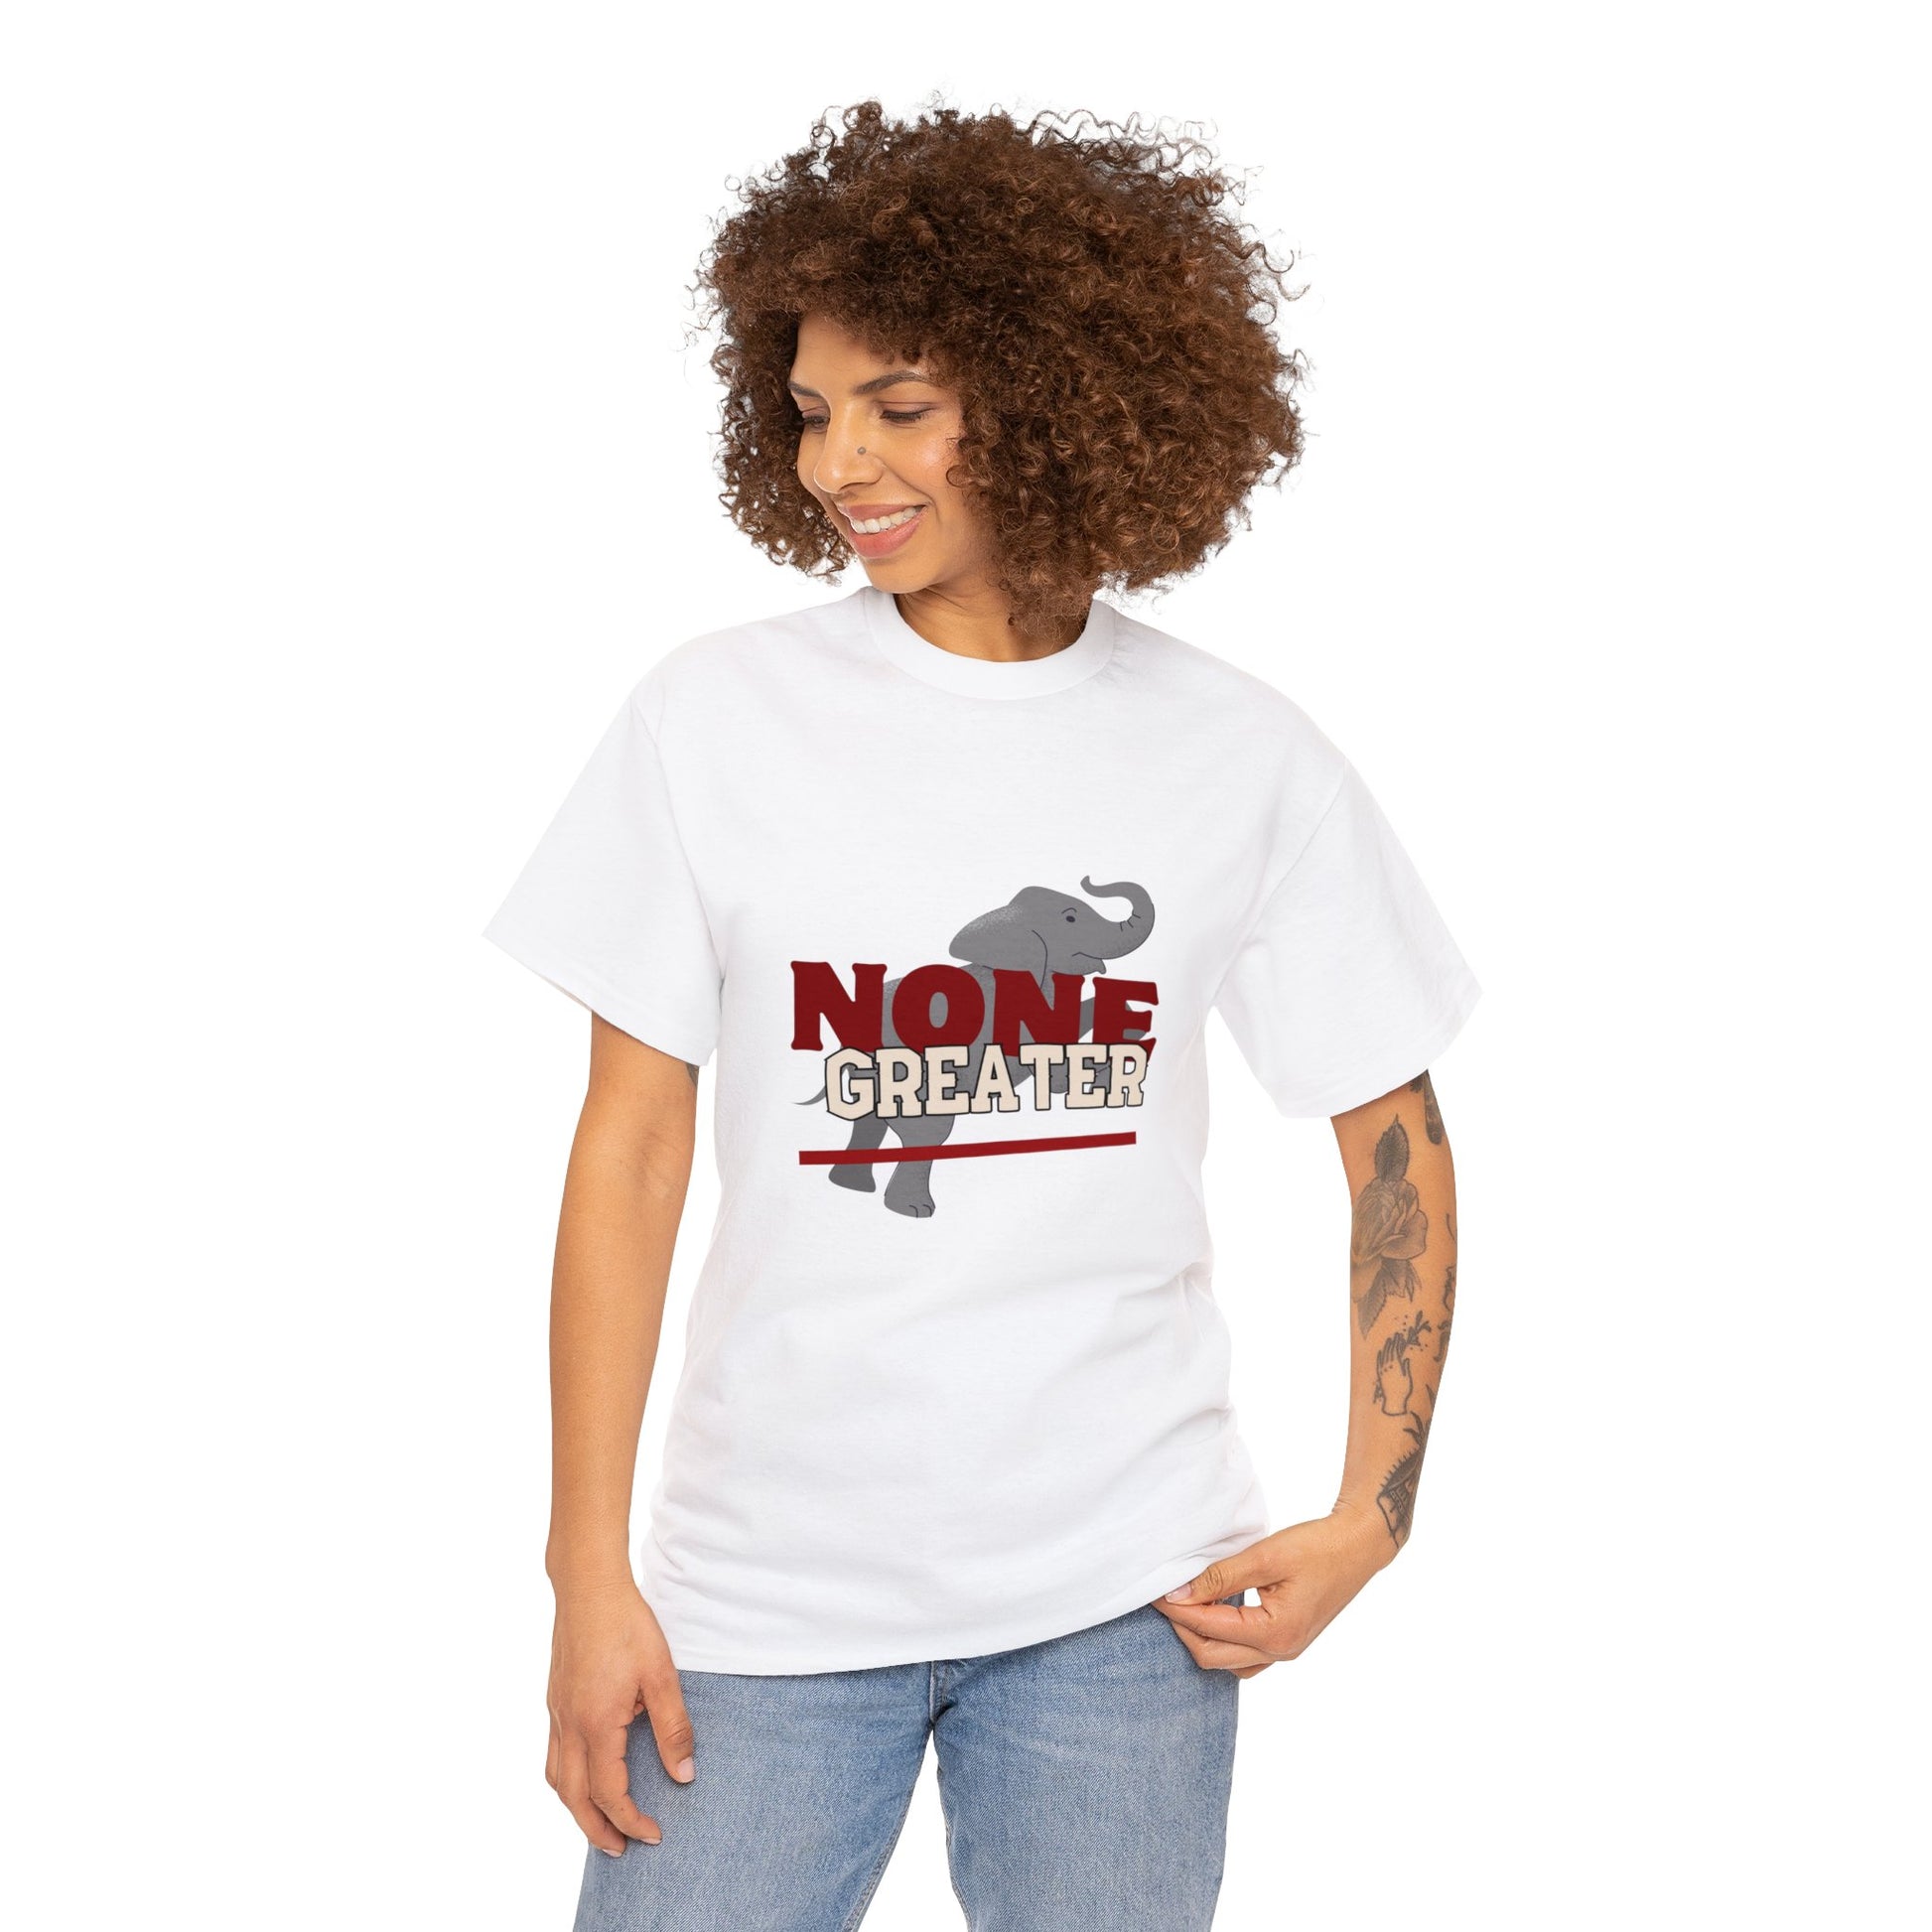 White Unisex Heavy Cotton Tee w/saying "None Greater" in Red/White with Grey Elephant in Background